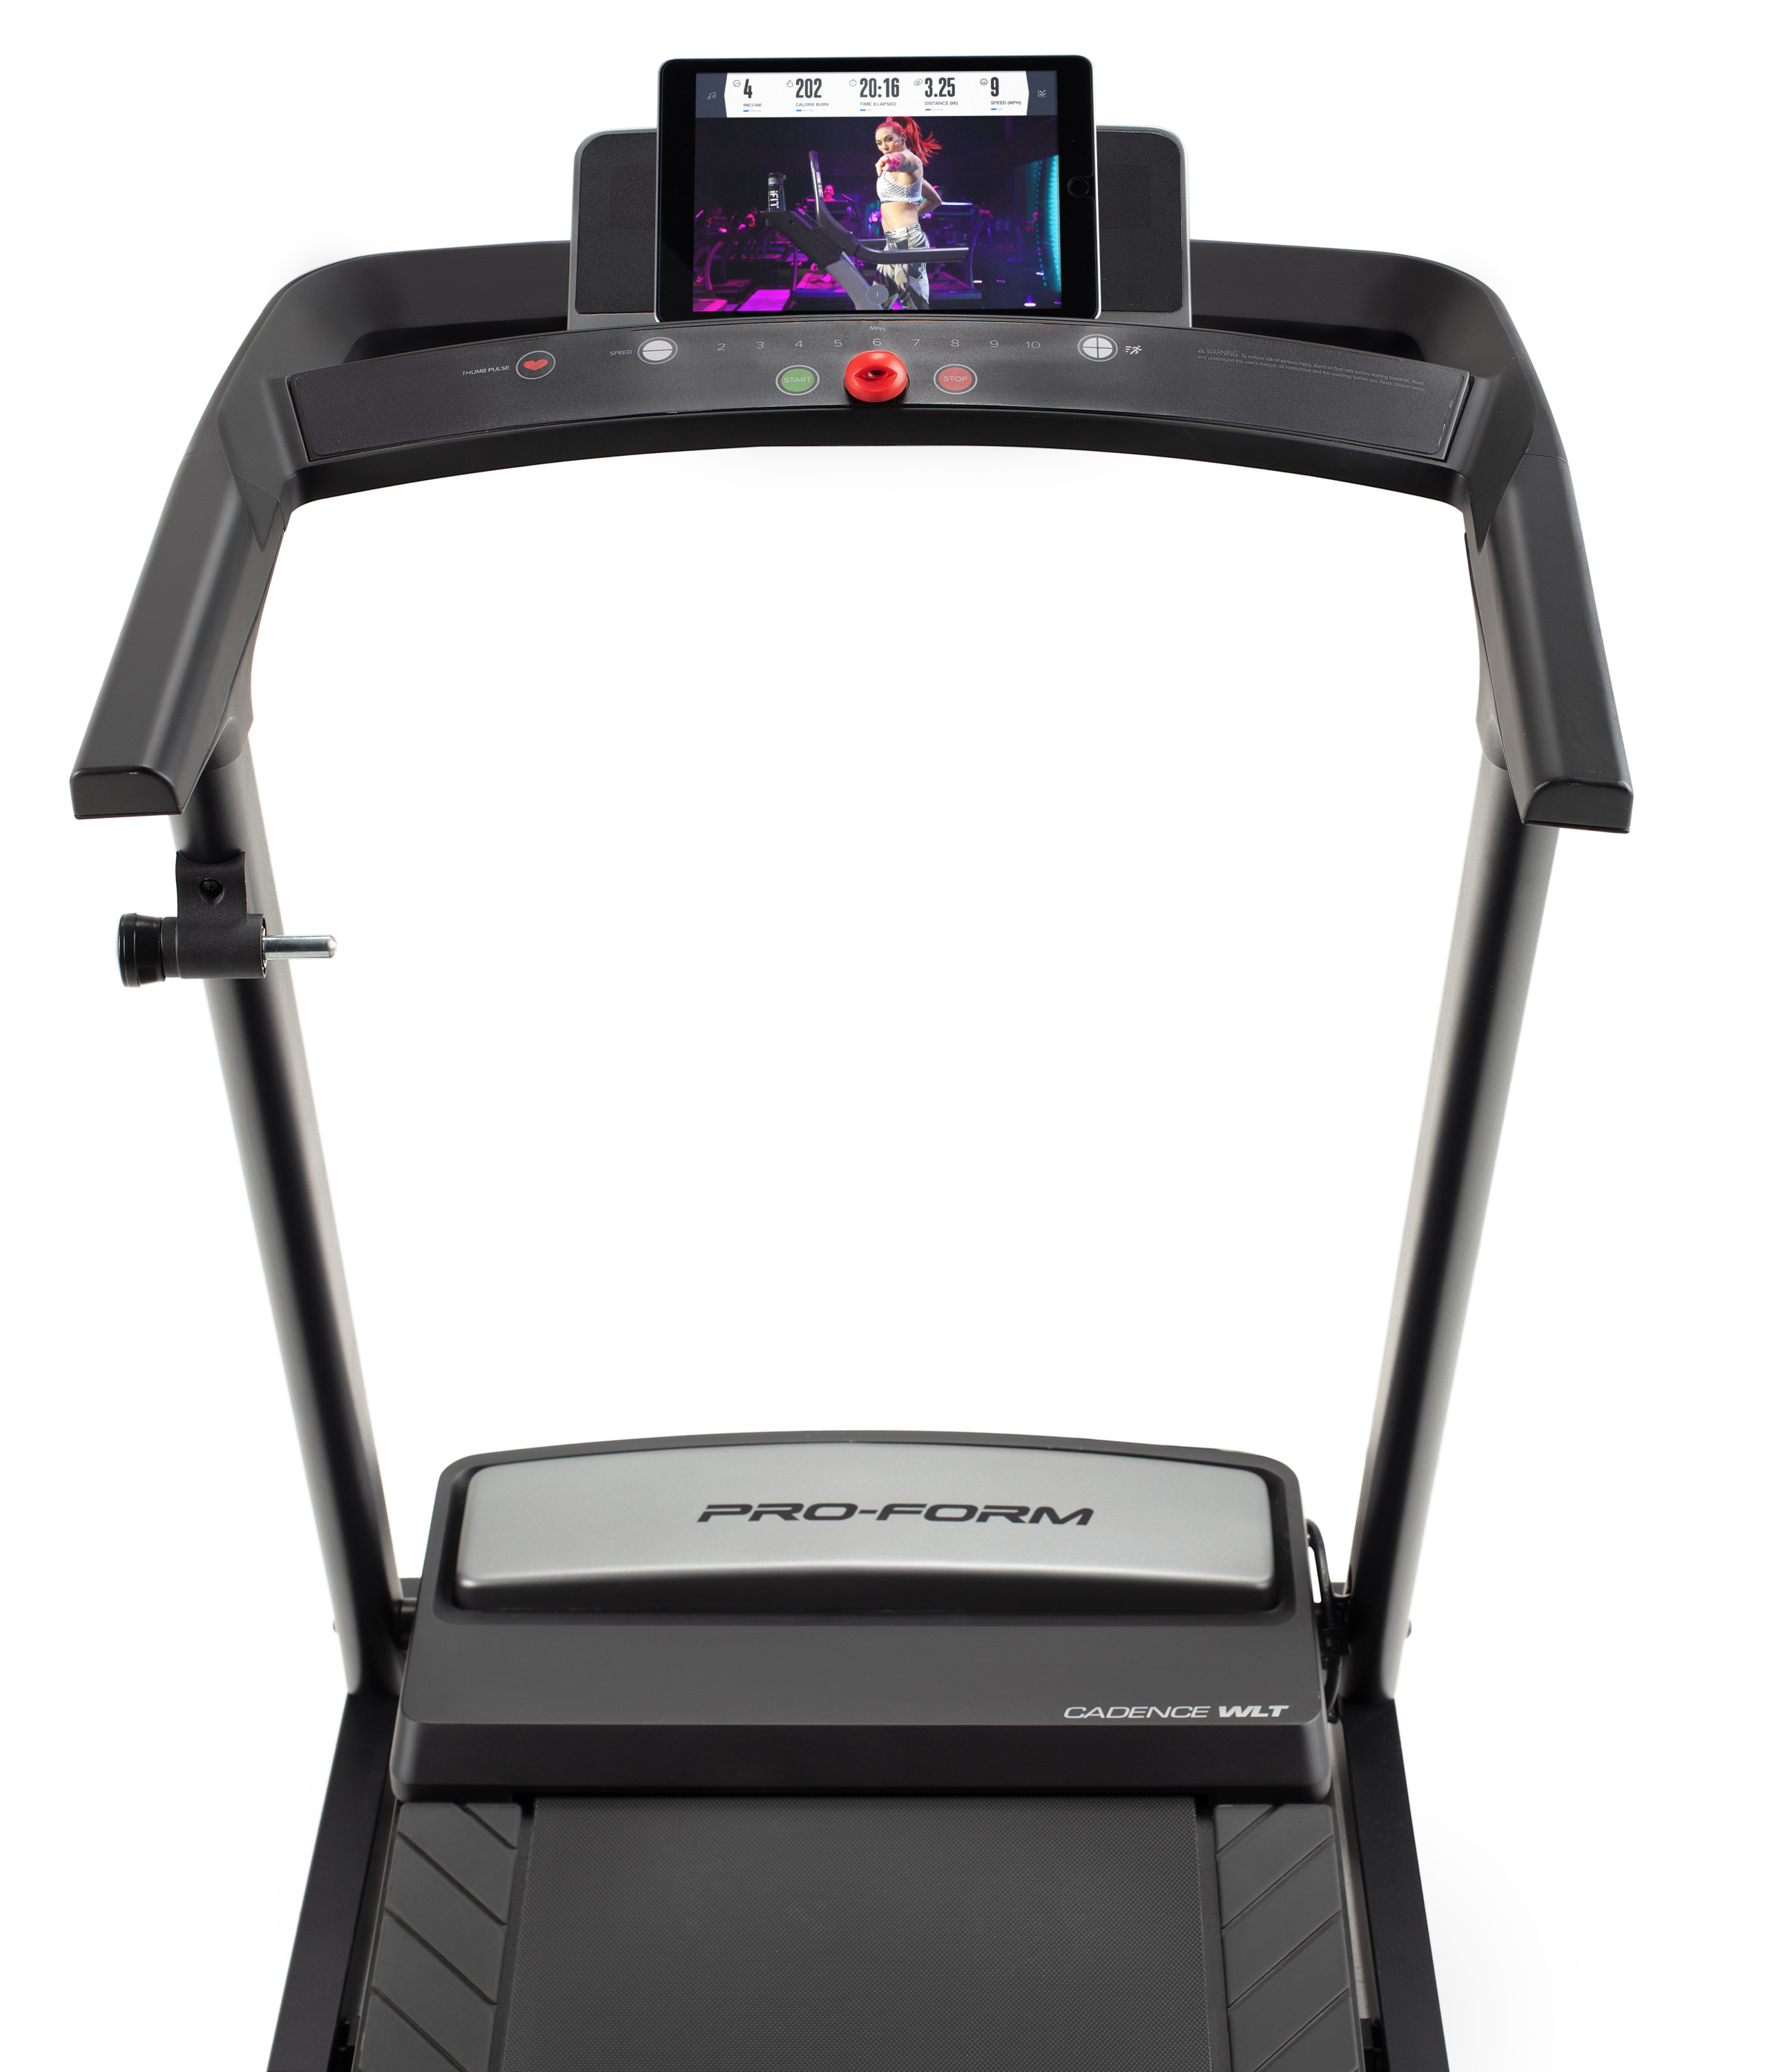 ProForm Cadence WLT Folding Treadmill with Reflex Deck for Walking and Jogging, iFit Bluetooth Enabled - image 14 of 31